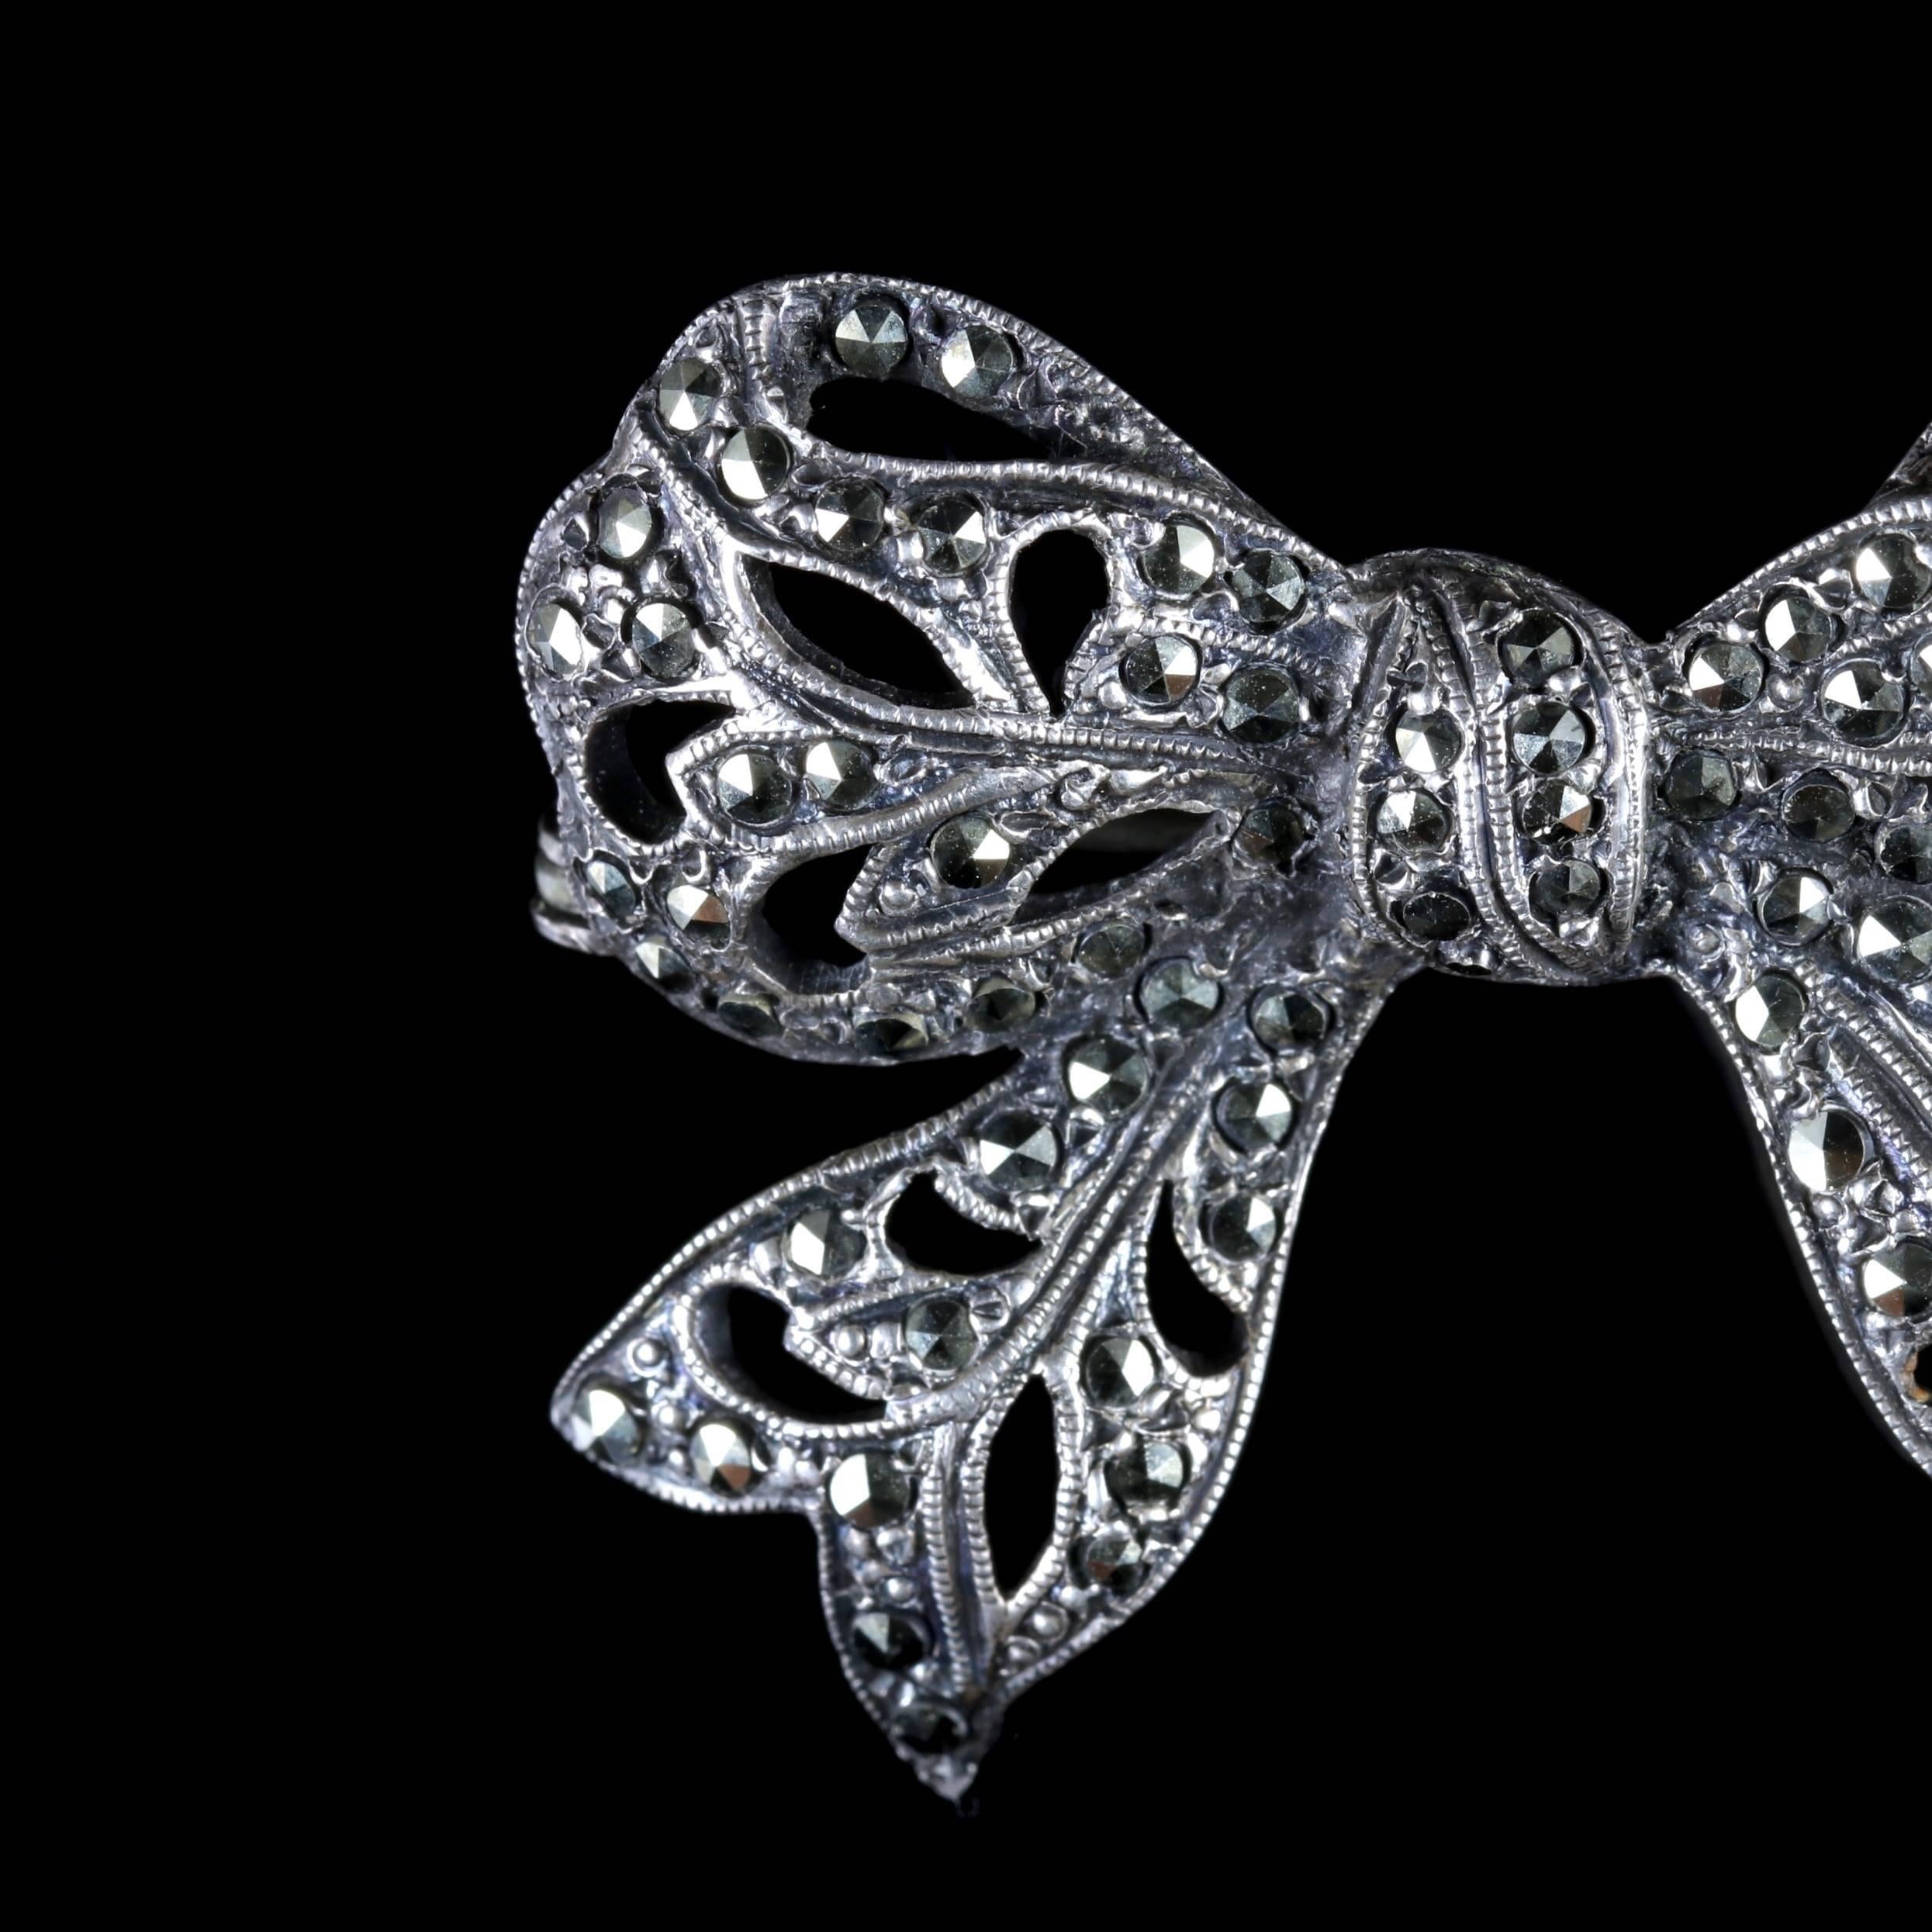 This beautiful Silver Edwardian bow brooch is adorned in Marcasites, Circa 1910.

During the Edwardian period jewellery became strikingly feminine with a lacy and delicate appearance. Bows very quickly became modern motifs.

The bow brooch shows